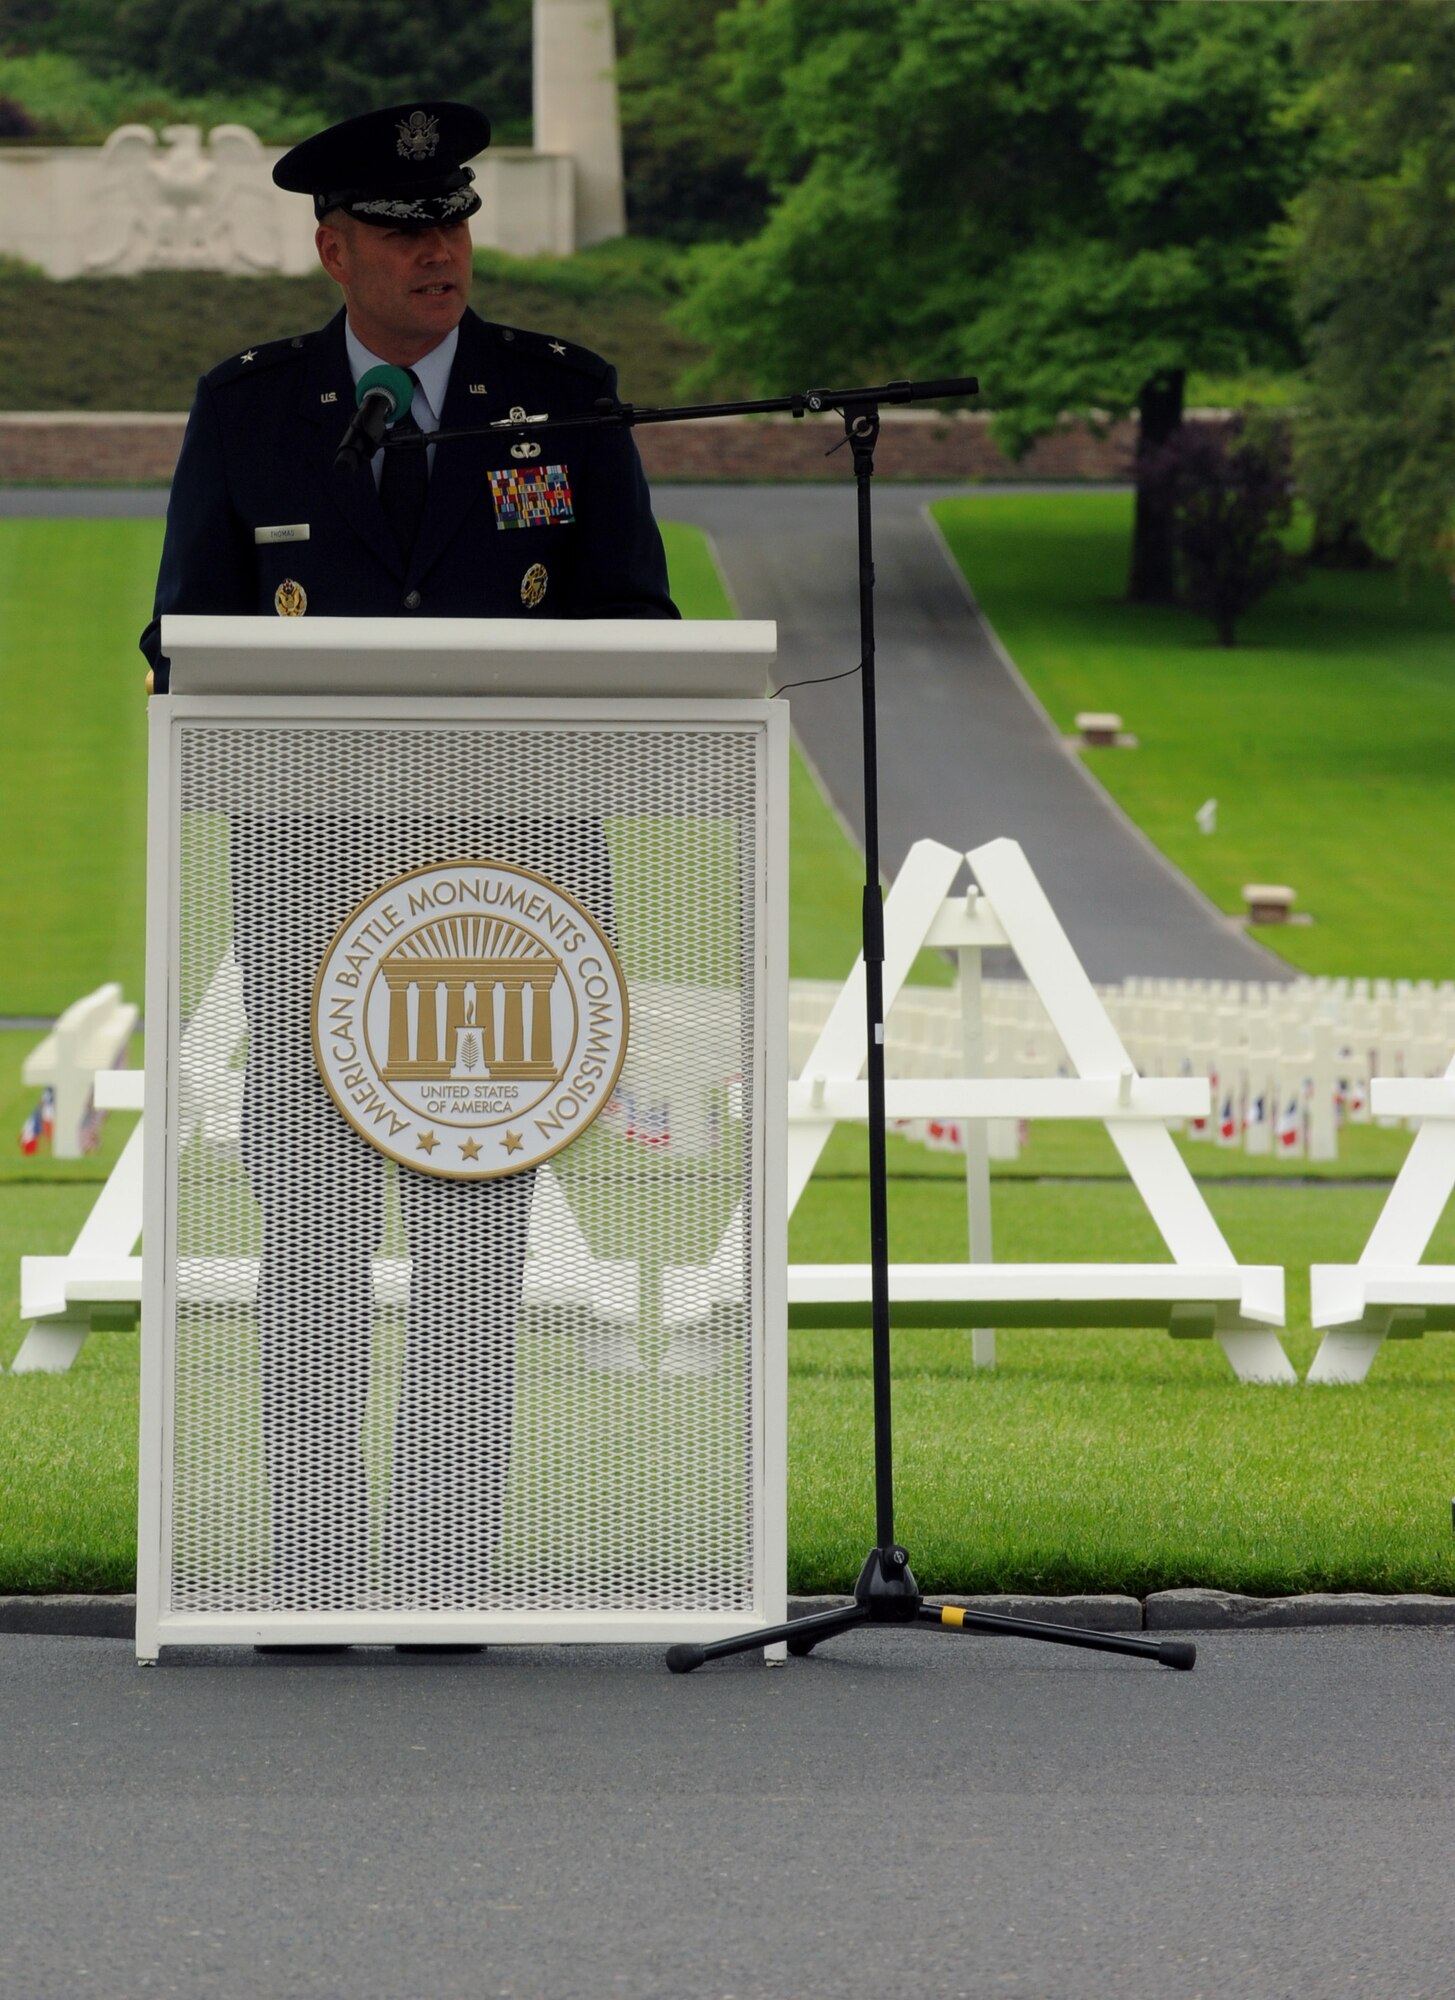 Brig. Gen. Jon Thomas, 86th Airlift Wing commander, delivers a speech during a Memorial Day ceremony May 29, 2016, at Lorraine American Cemetery and Memorial, in St. Avold, France. Memorial Day commemorates fallen servicemembers. (U.S. Air Force photo/Staff Sgt. Sharida Jackson)